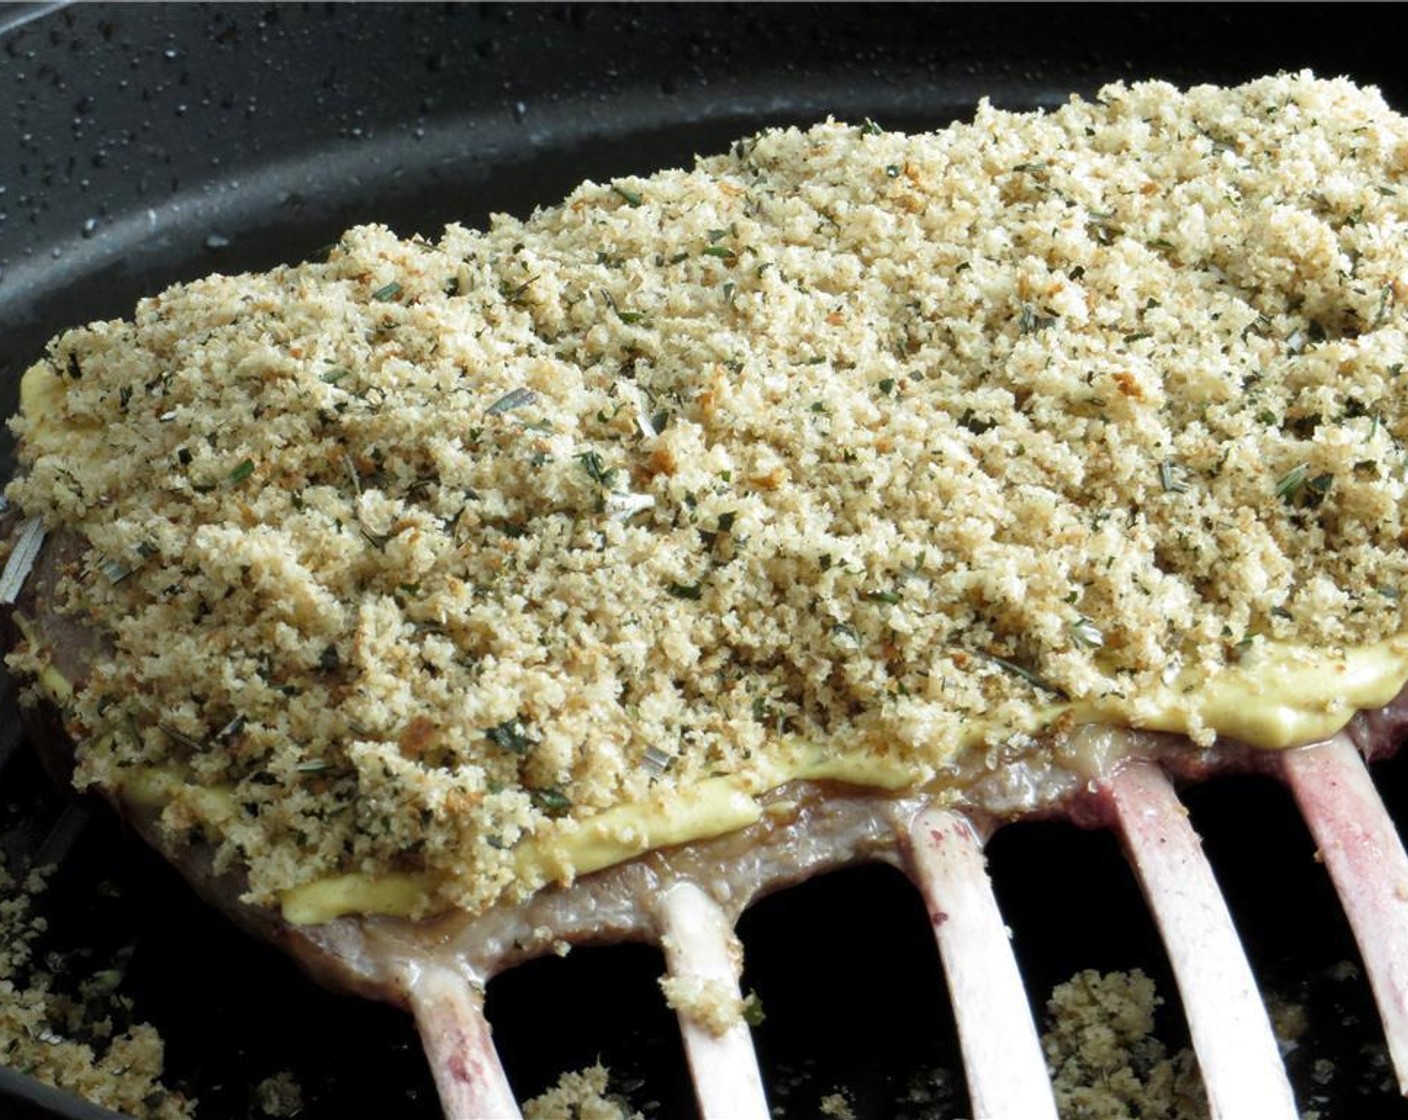 step 3 Flip lamb over, and cook for an additional minute. Remove from heat. Spread Dijon Mustard (1 Tbsp) on fattier side of rack of lamb. Top dijon mustard with bread crumbs, pressing down slightly to adhere.